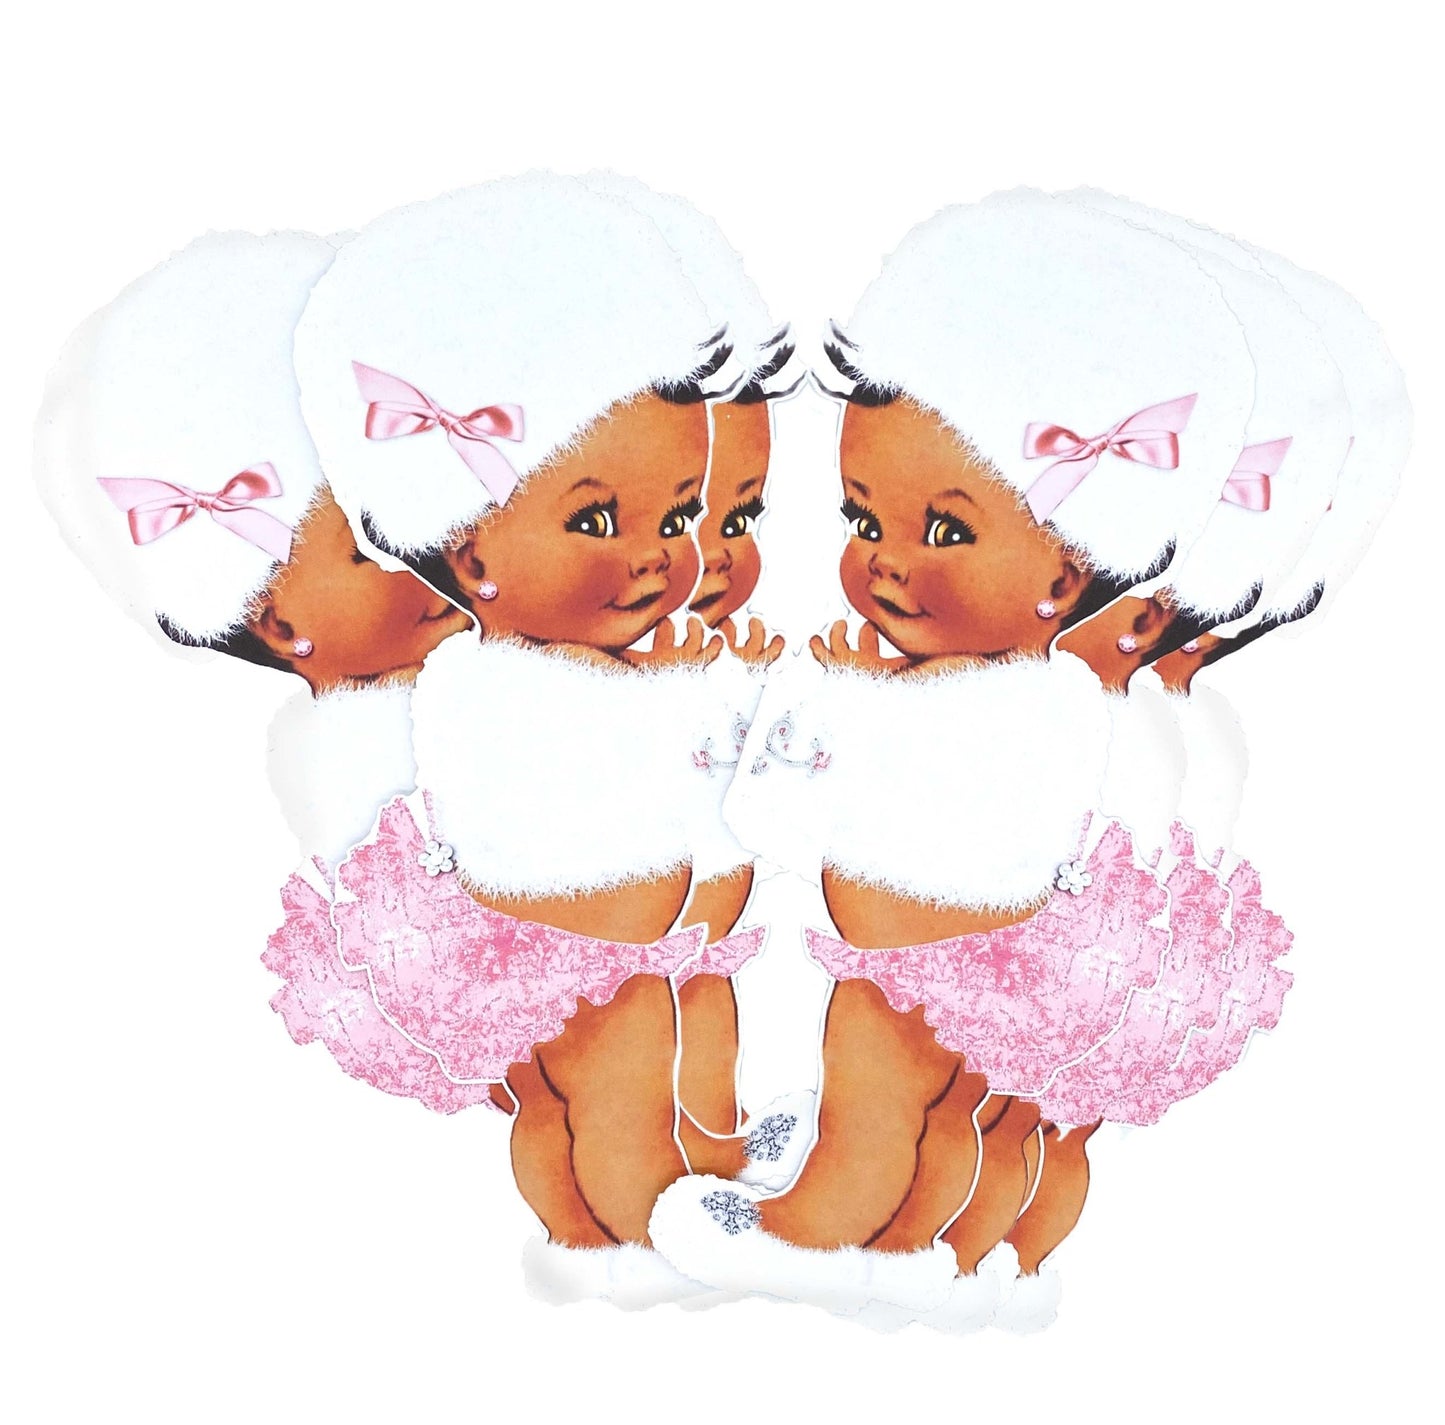 Cutouts Winter Princess with White Fur Cape Baby Girl Baby Shower Decoration One Sided Print -princess-princess baby shower